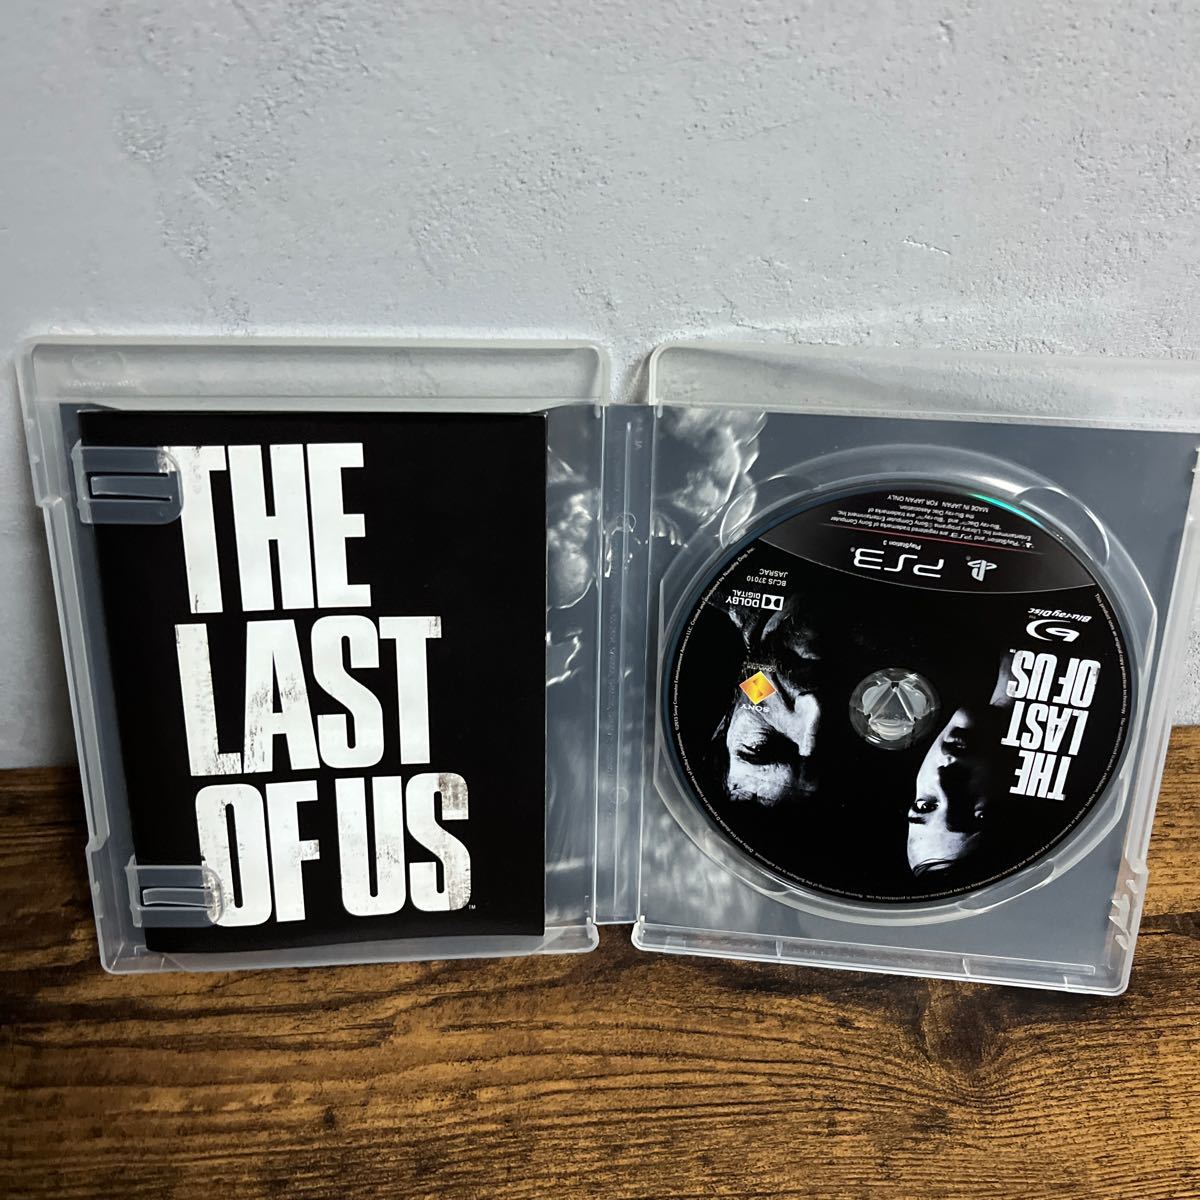 【PS3】 The Last of Us [通常版］